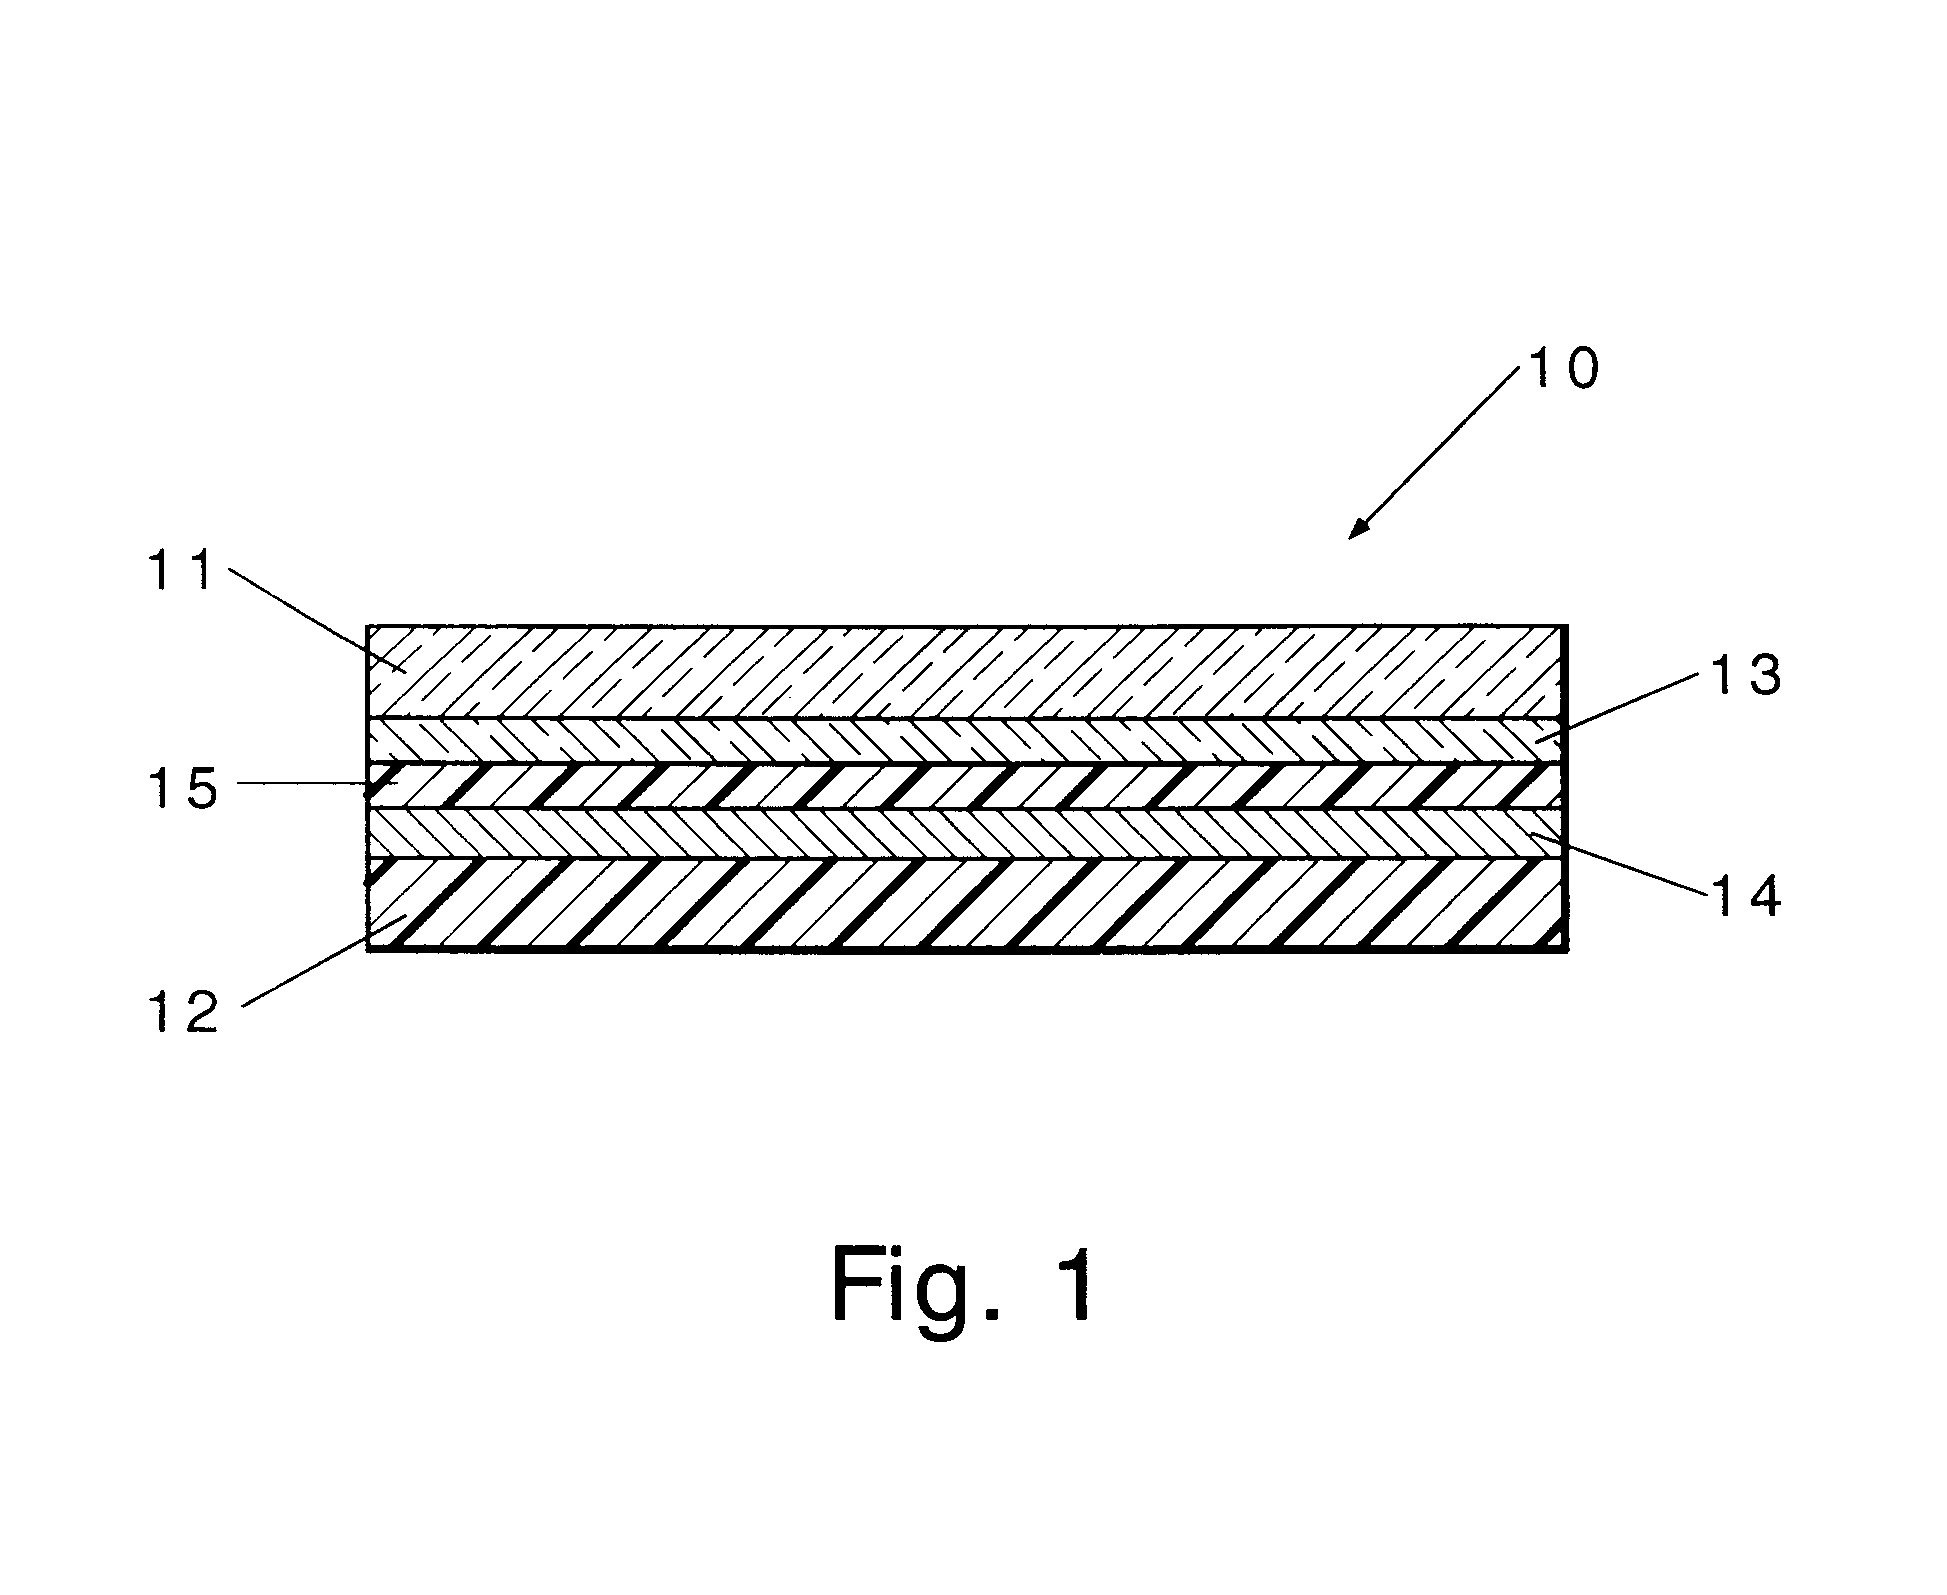 Electrochromic display device and compositions useful in making such devices